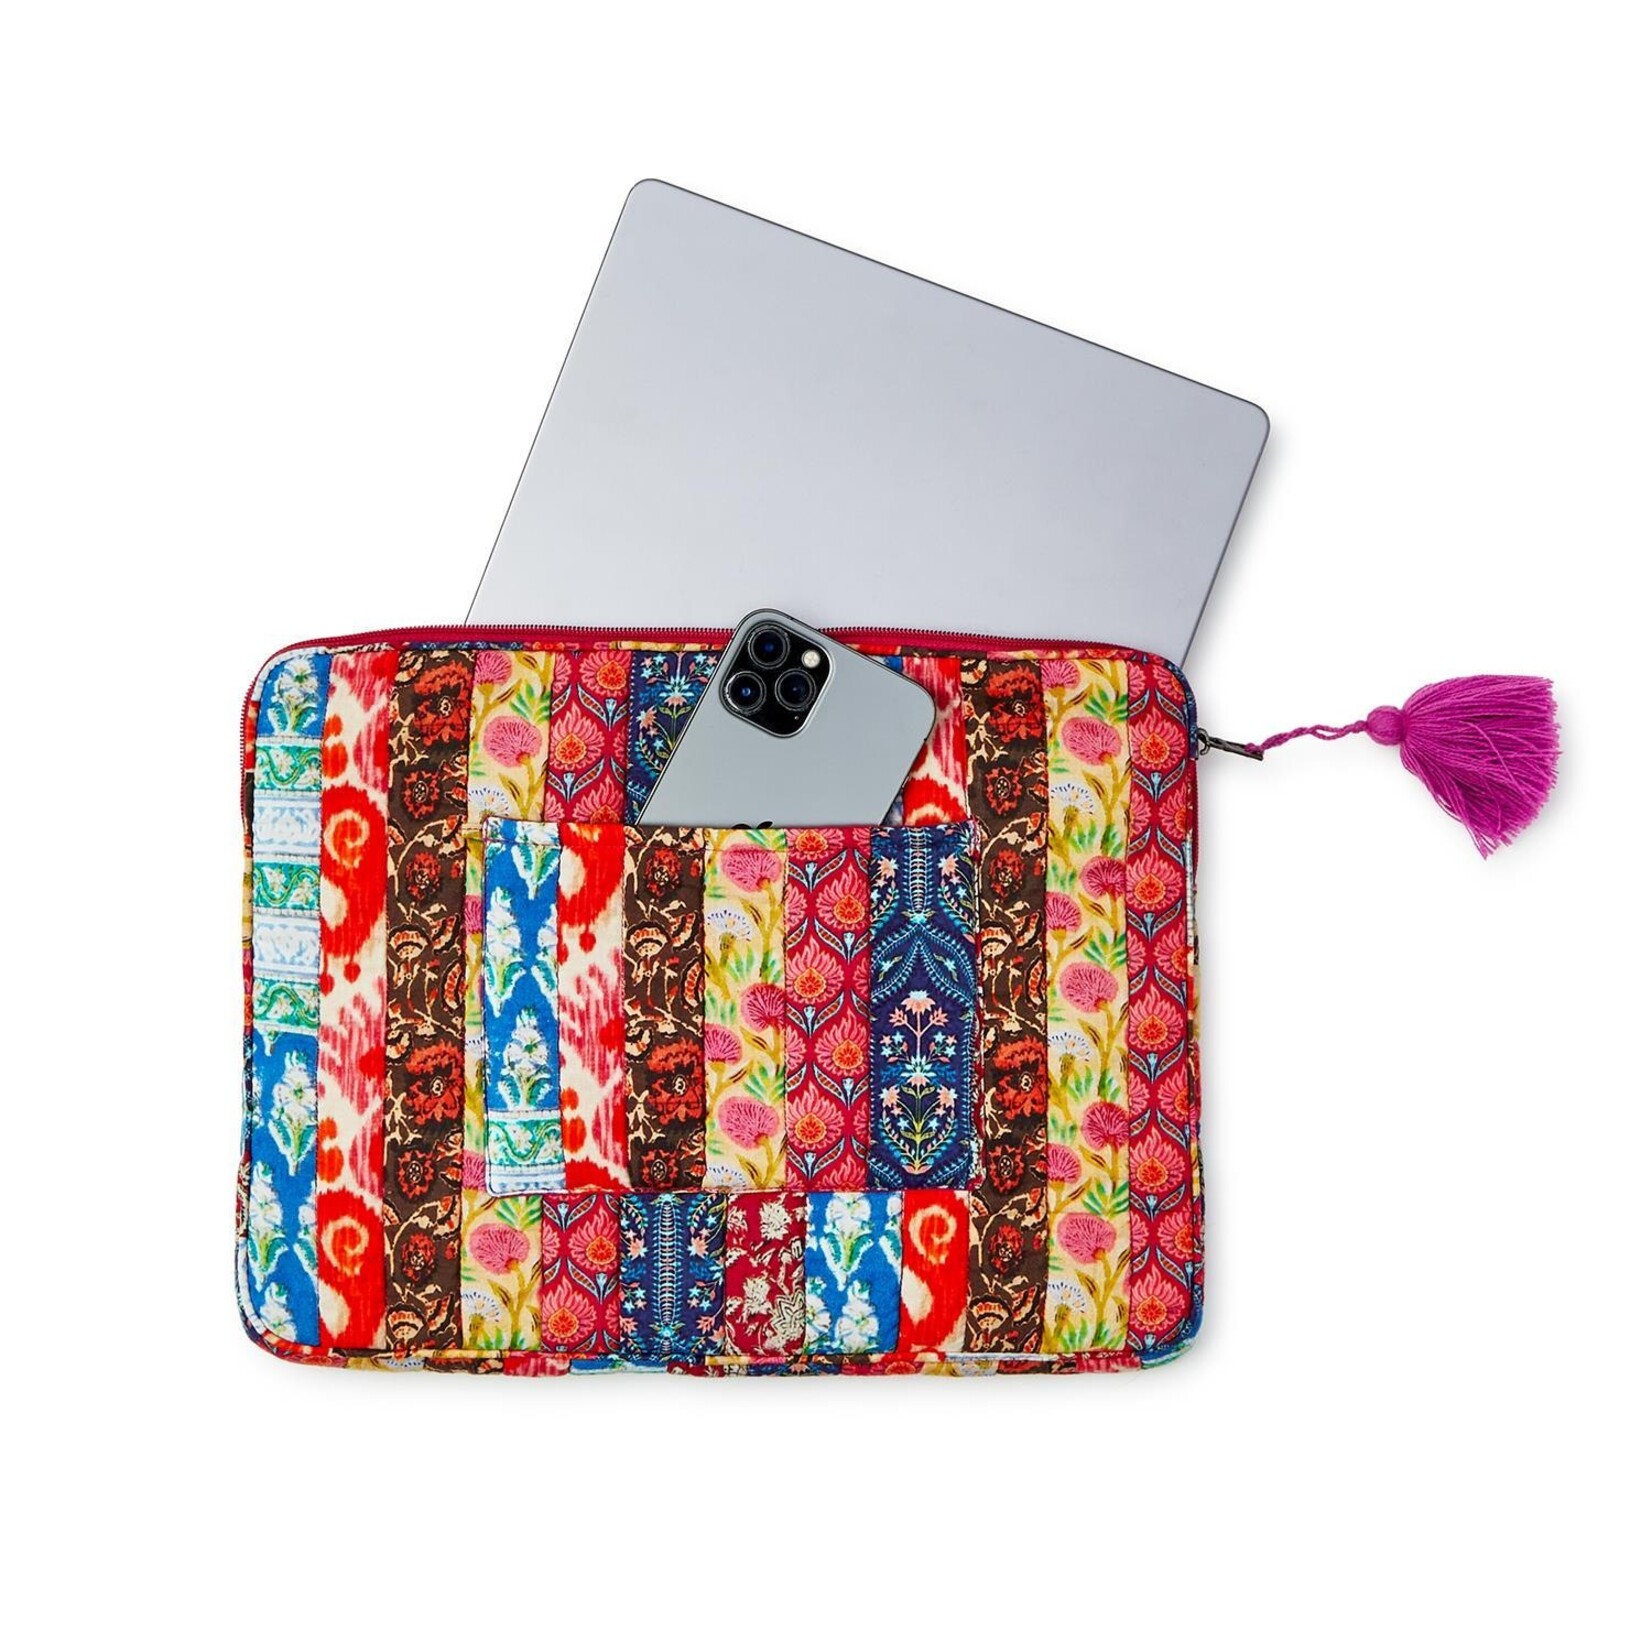 Two's Company Stow Away Laptop Pouch in Printed Fabric